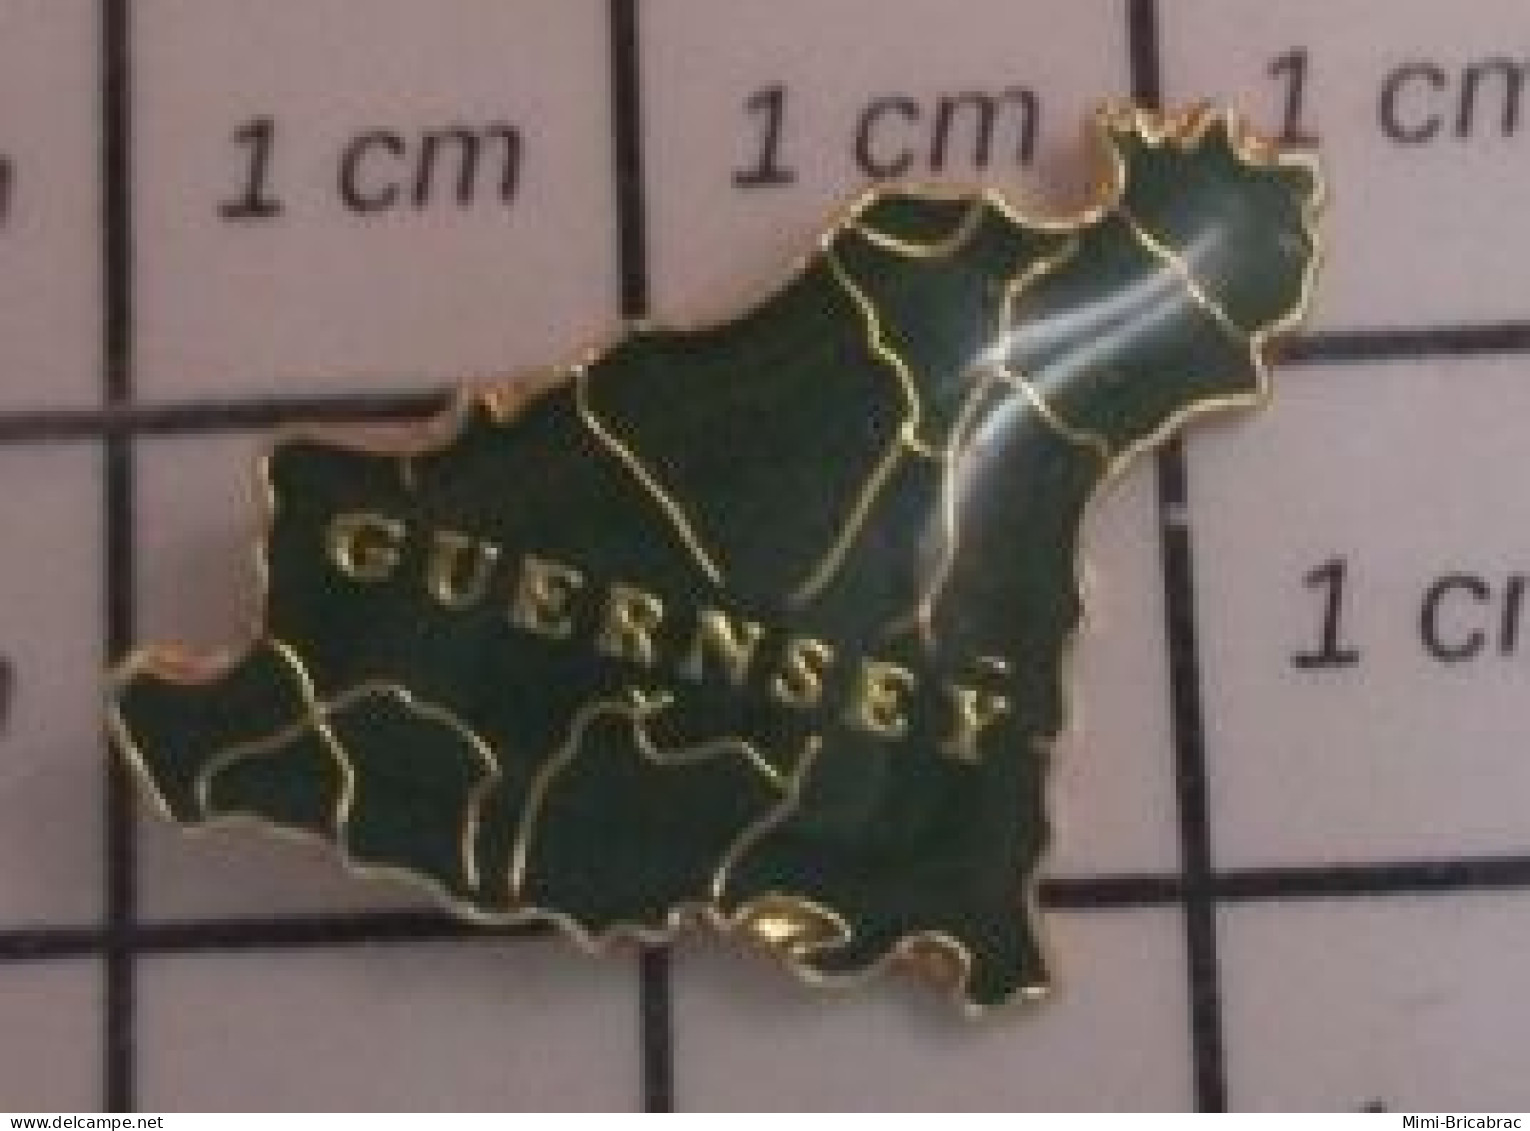 912E Pin's Pins / Beau Et Rare / AUTRES / GUERNESEY GUERNSEY ILE ANGLO-NORMANDE ST SAVIOUR ST PETER PORT - Other & Unclassified